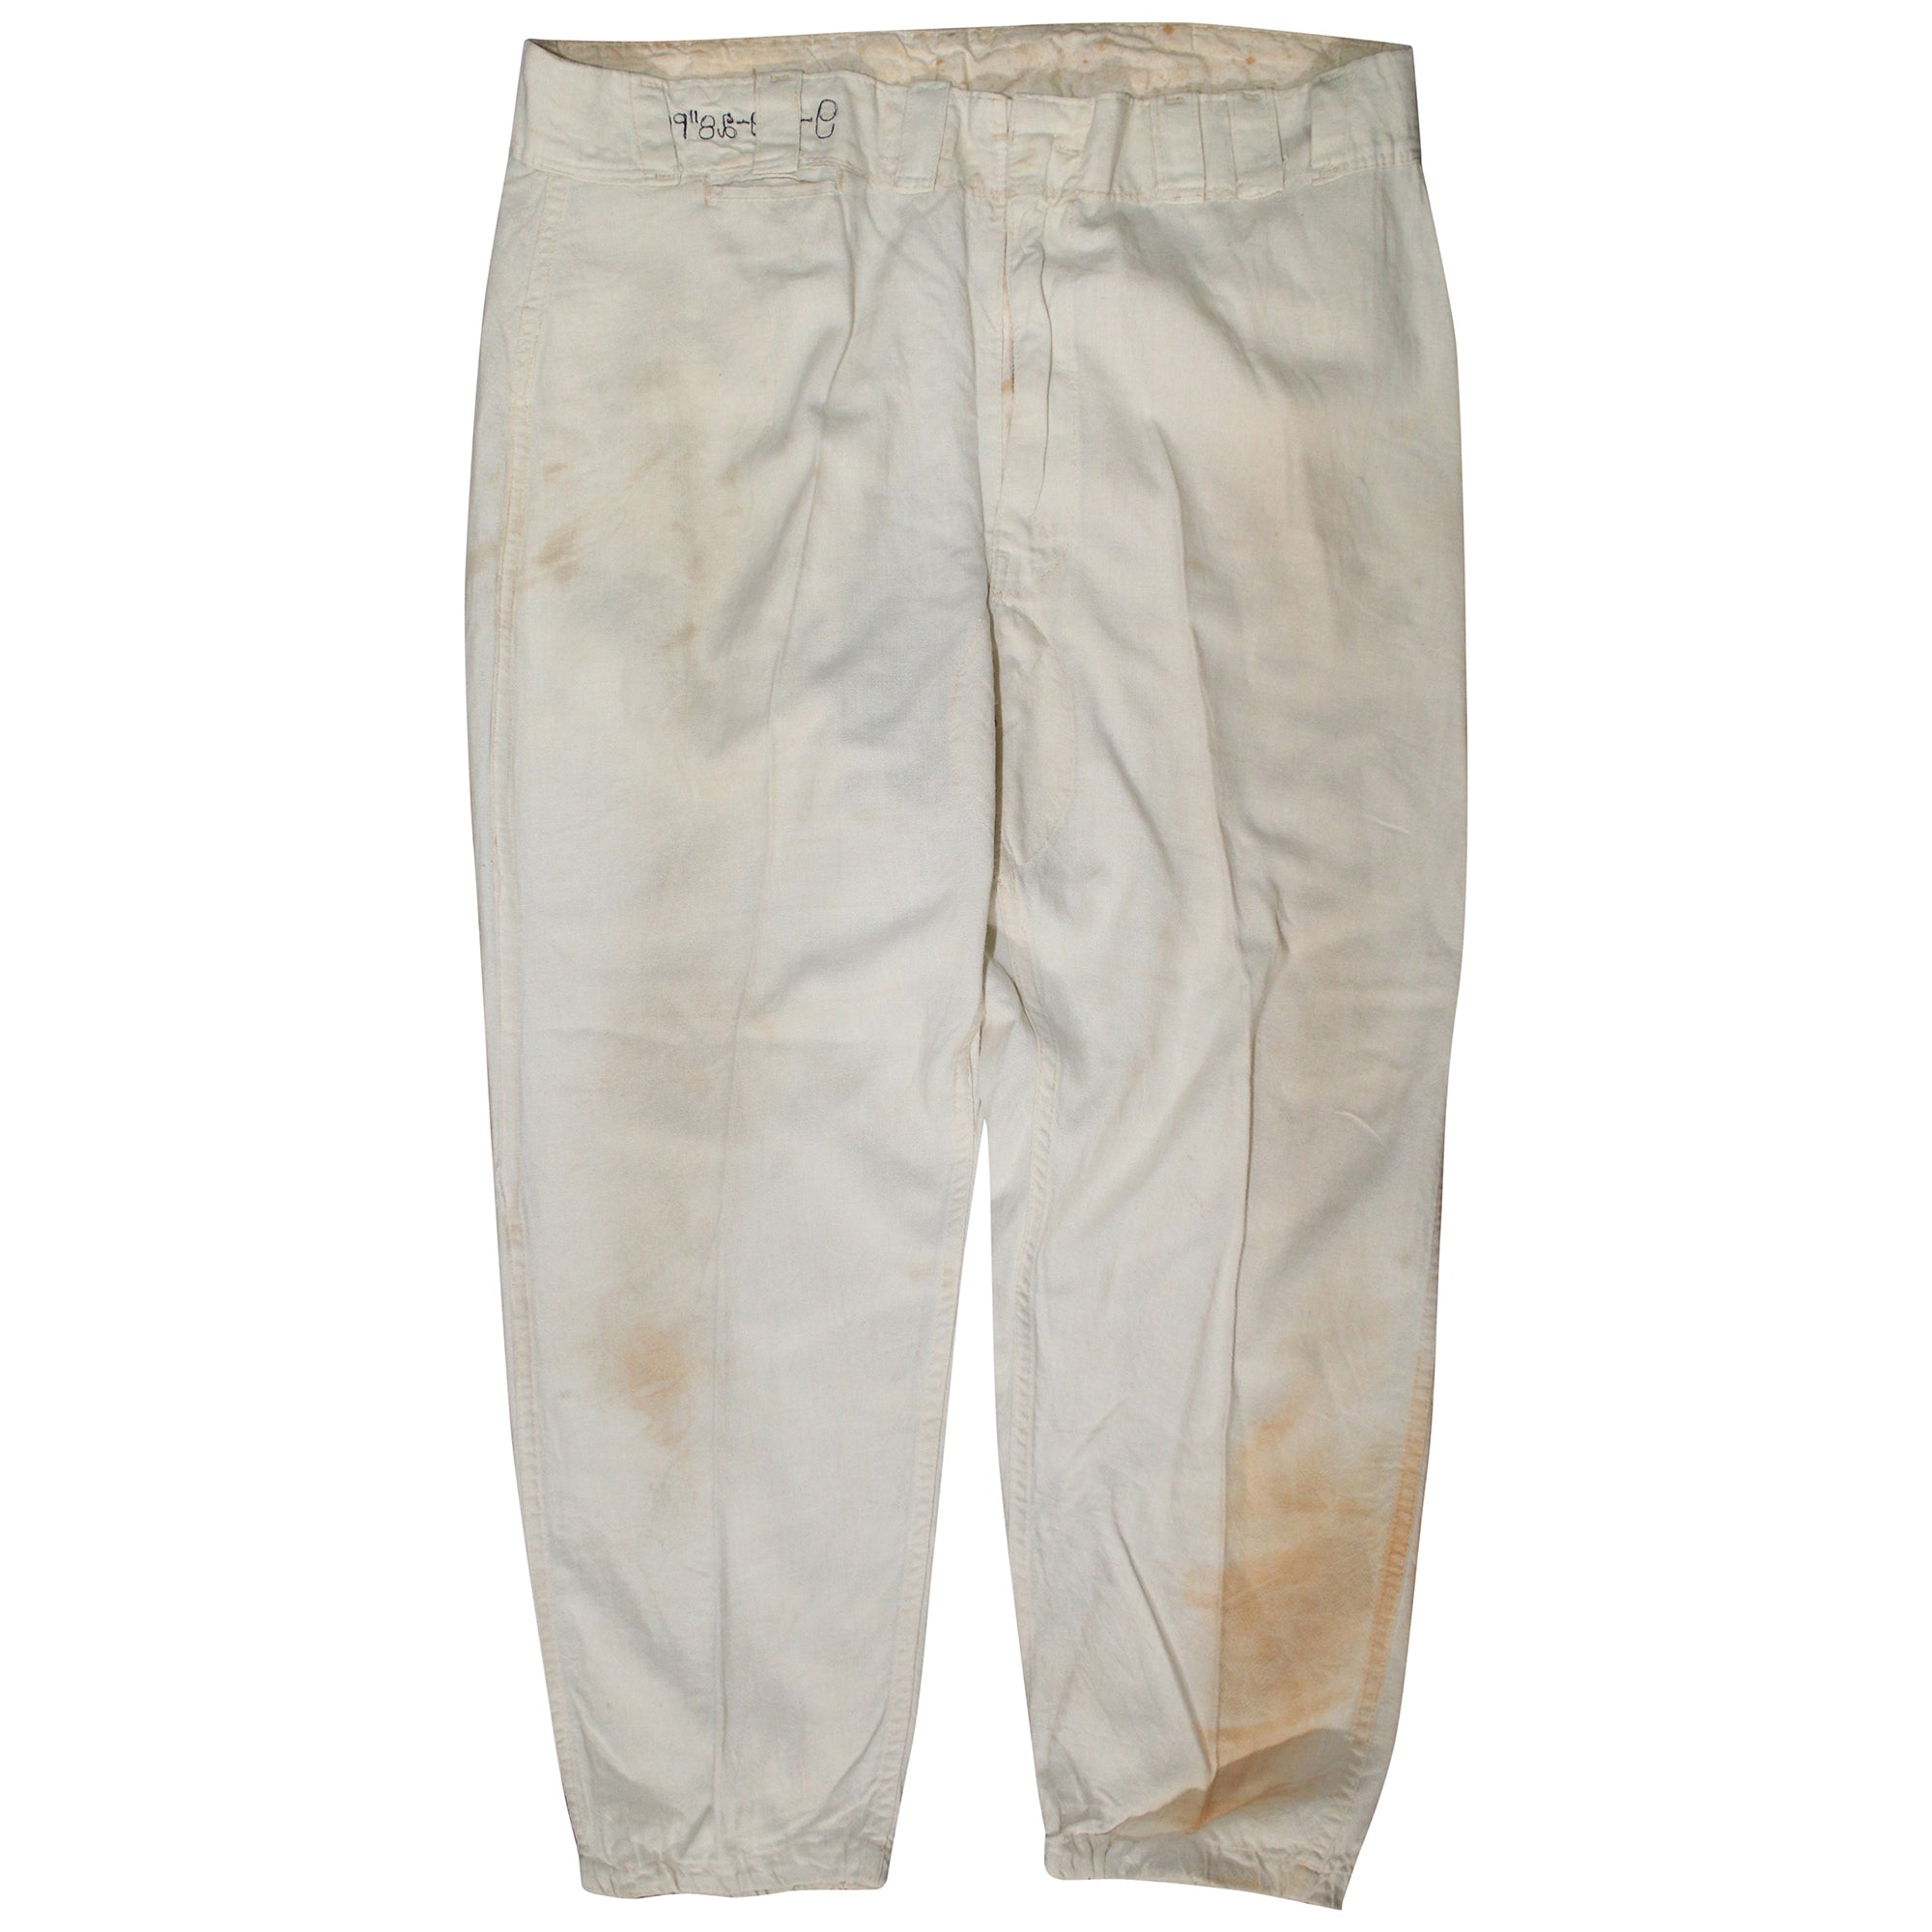 Ted Williams 1969 Game Worn Pants